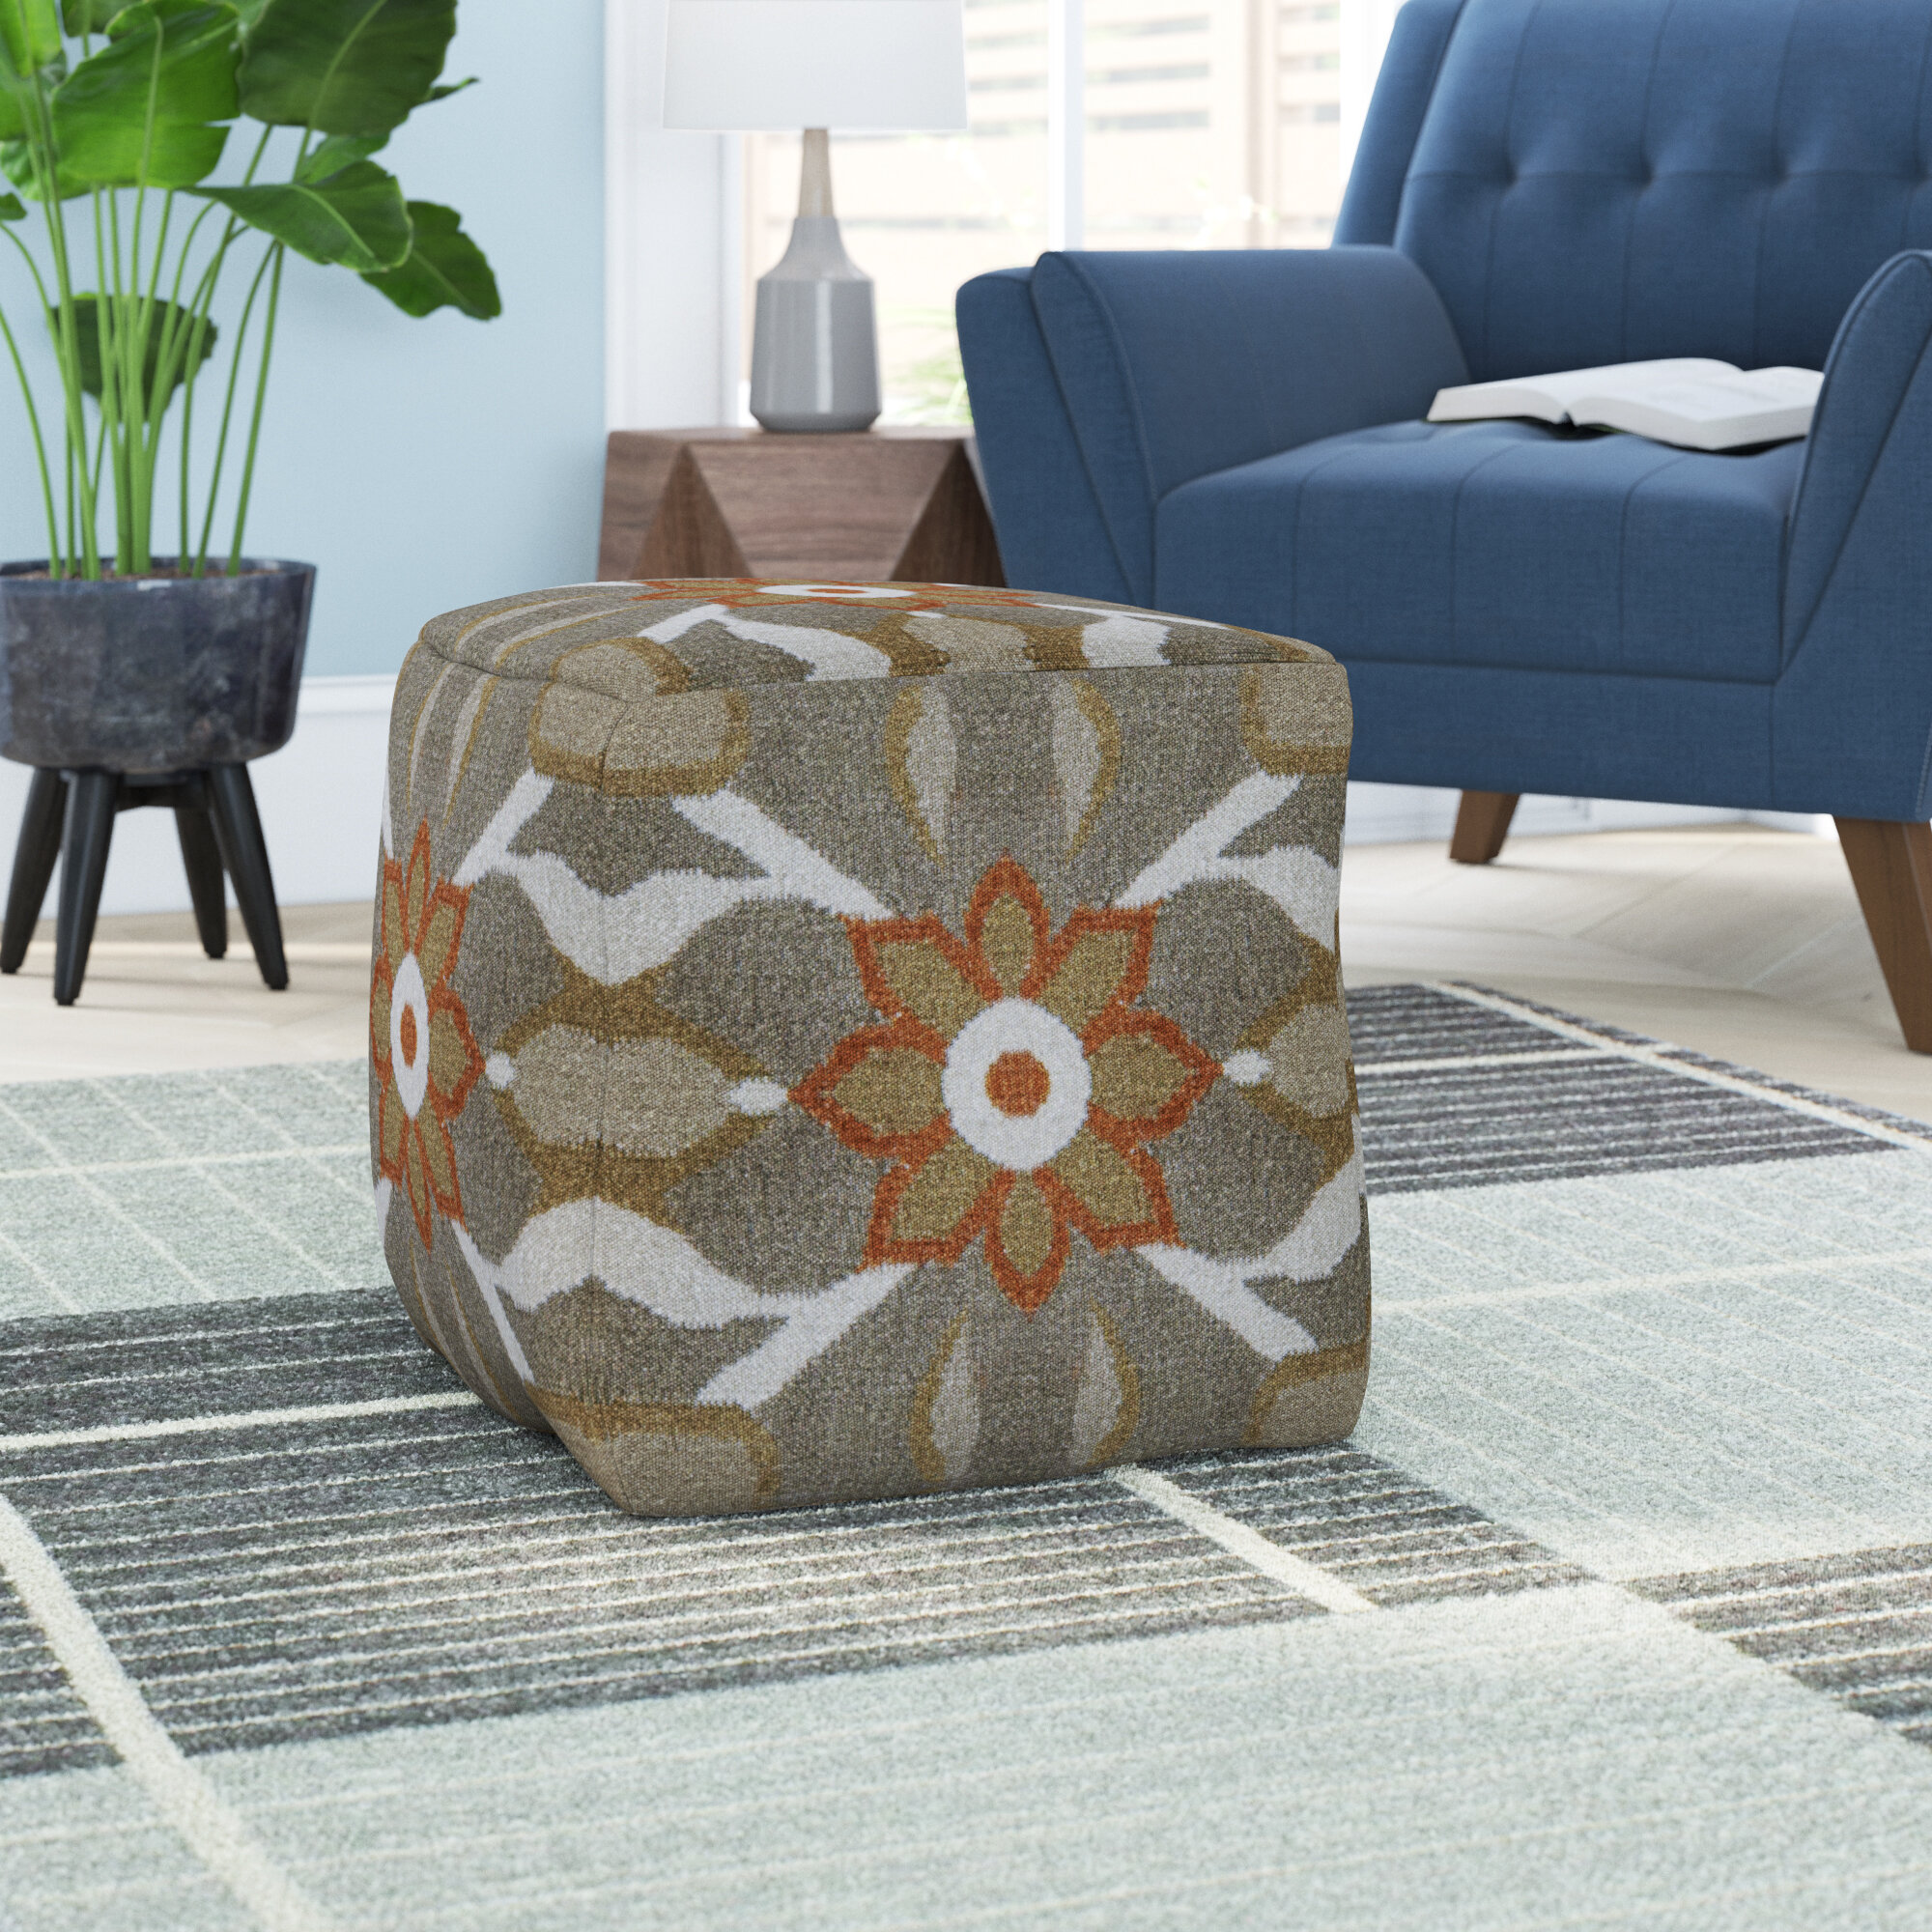 Red Barrel Studio® Brindle Blue Indoor/Outdoor Pouf - Zipper Cover with  Luxury Polyfil Stuffing - 17 x 17 x 17 Cube